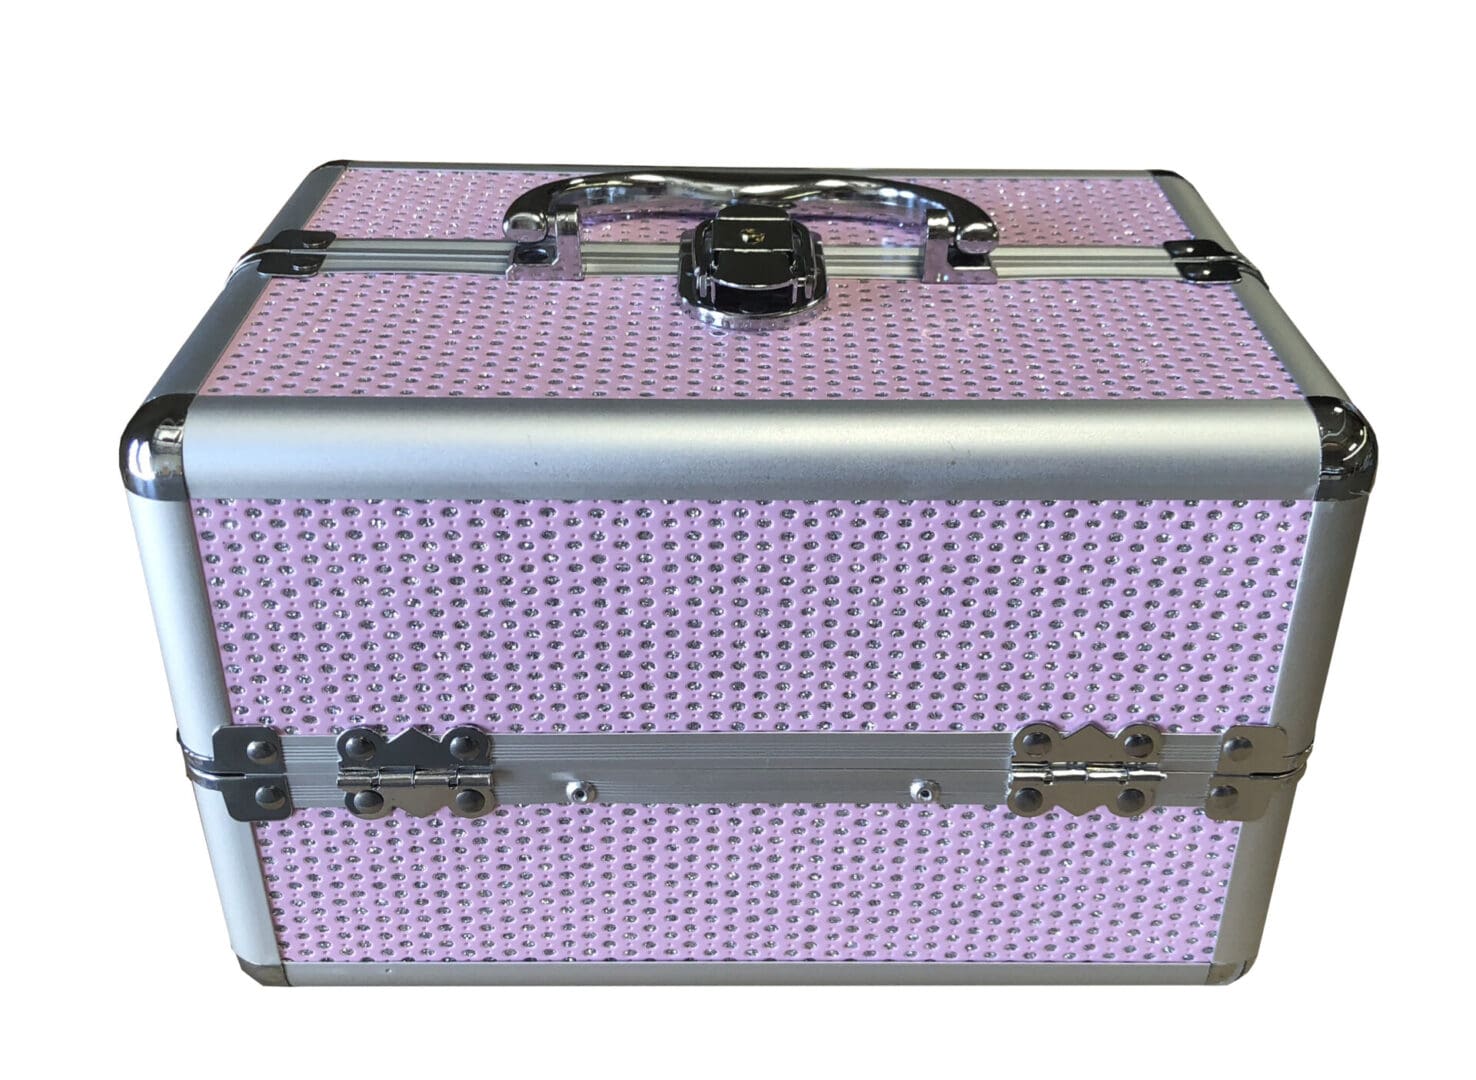 A purple and silver case with a handle